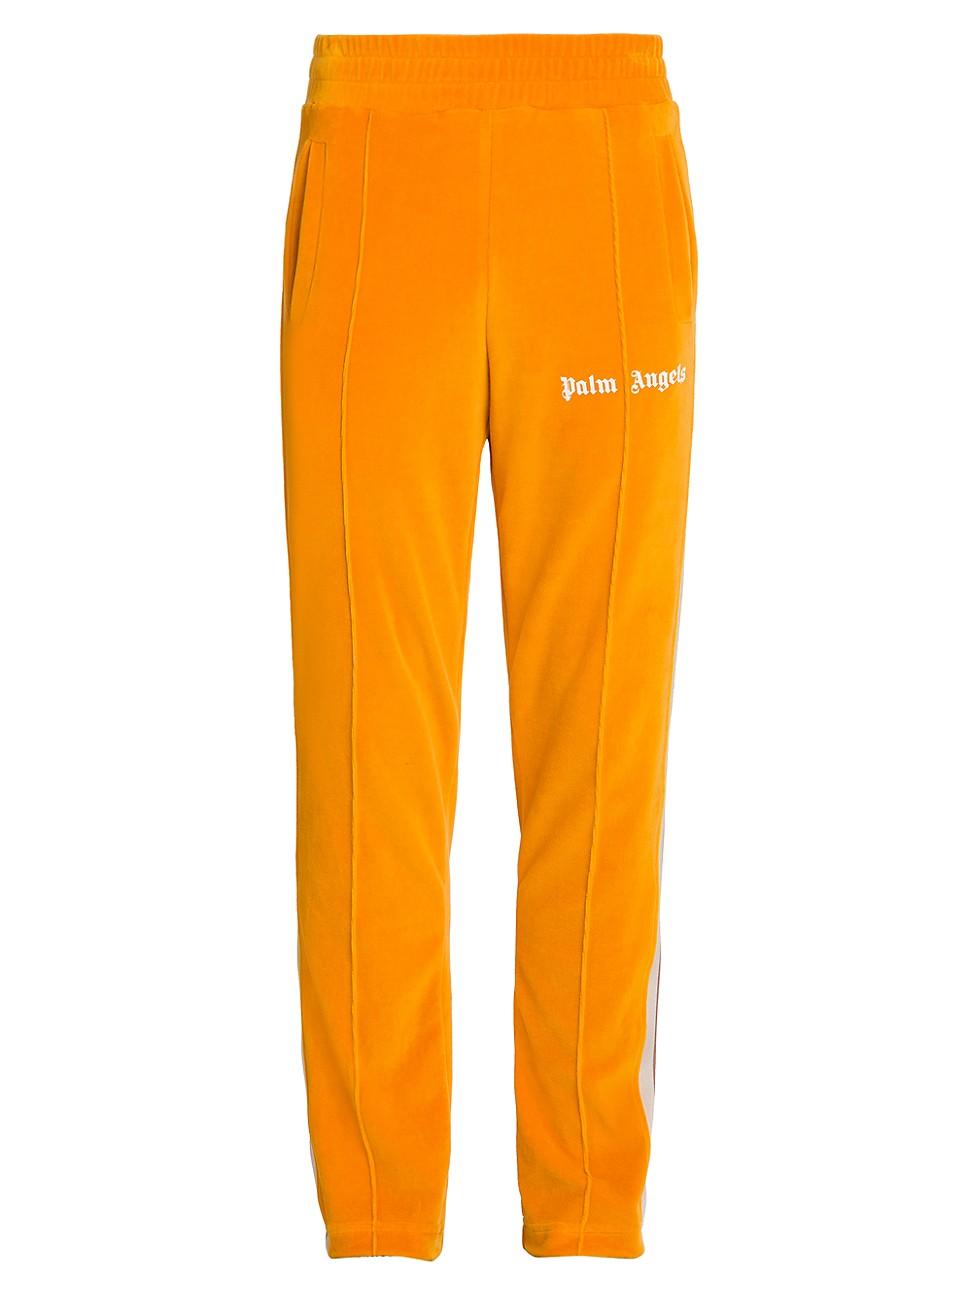 Palm Angels Cotton Chenille Side Stripe Track Pants in Orange for Men -  Save 94% - Lyst